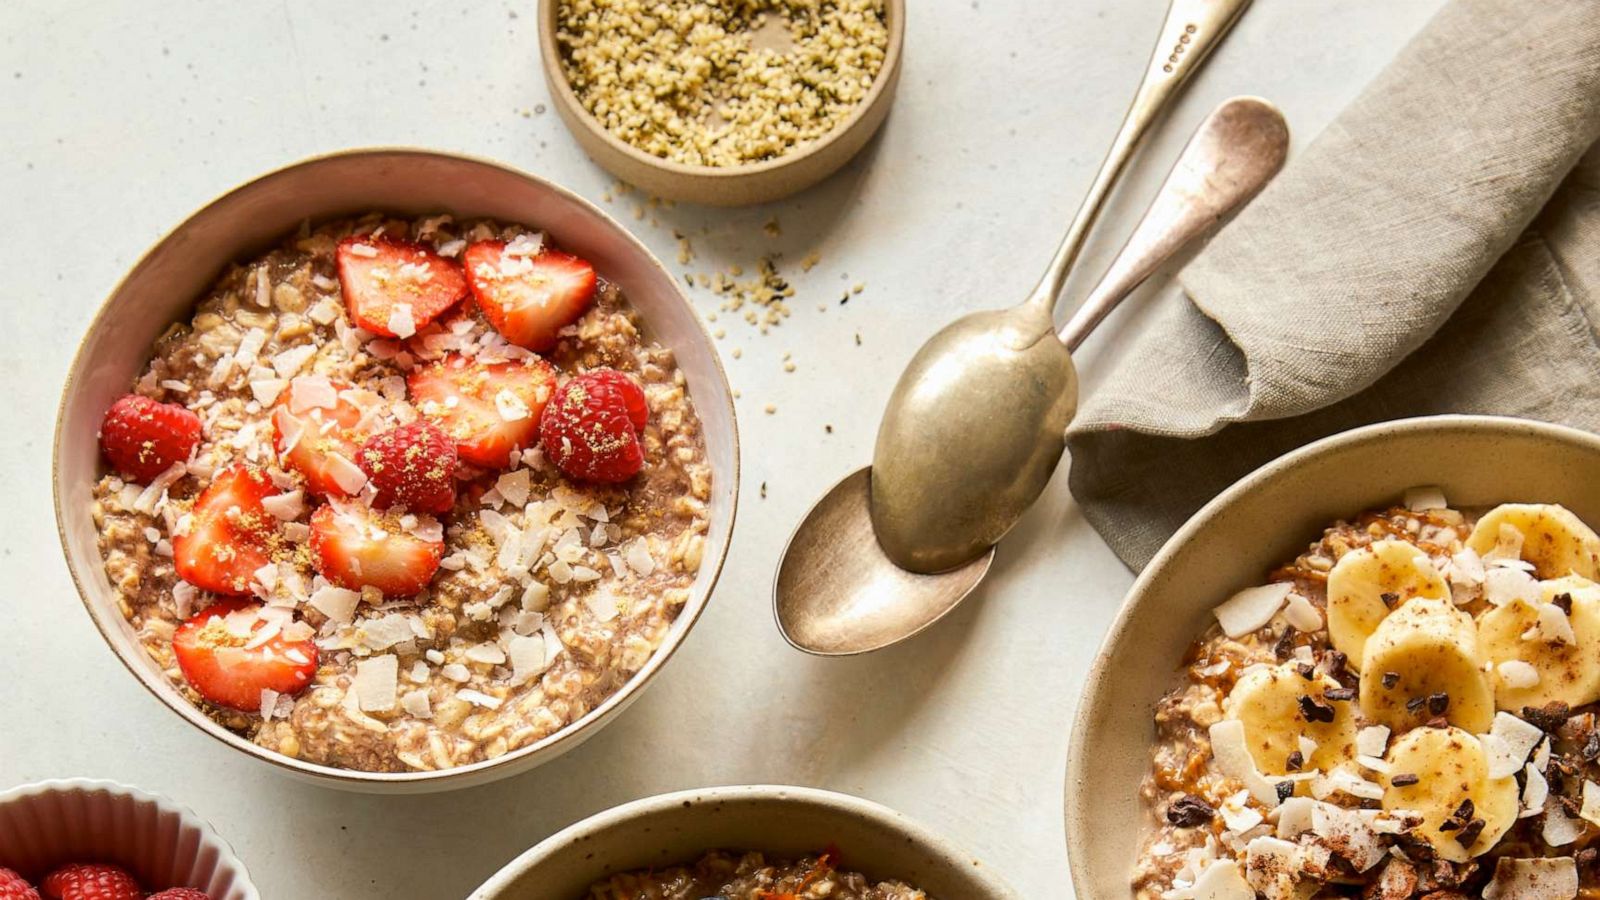 Win a Prize-Pack of MOM's Oats!, Food Network Healthy Eats: Recipes,  Ideas, and Food News